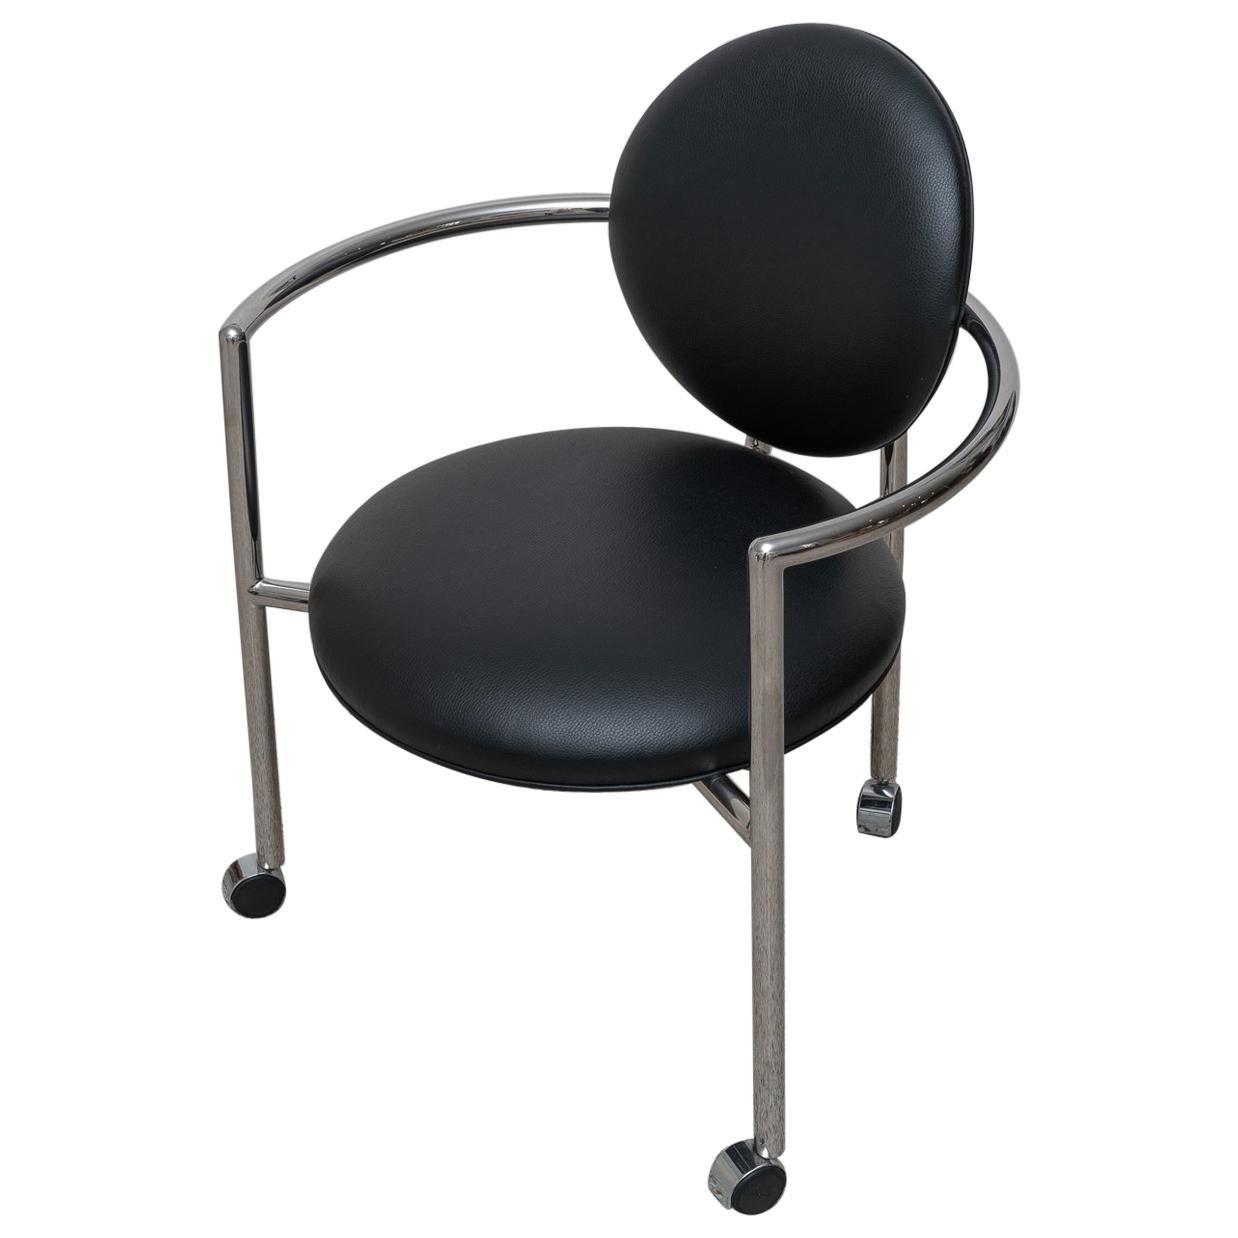  Black Leather and Chrome Arm Chair